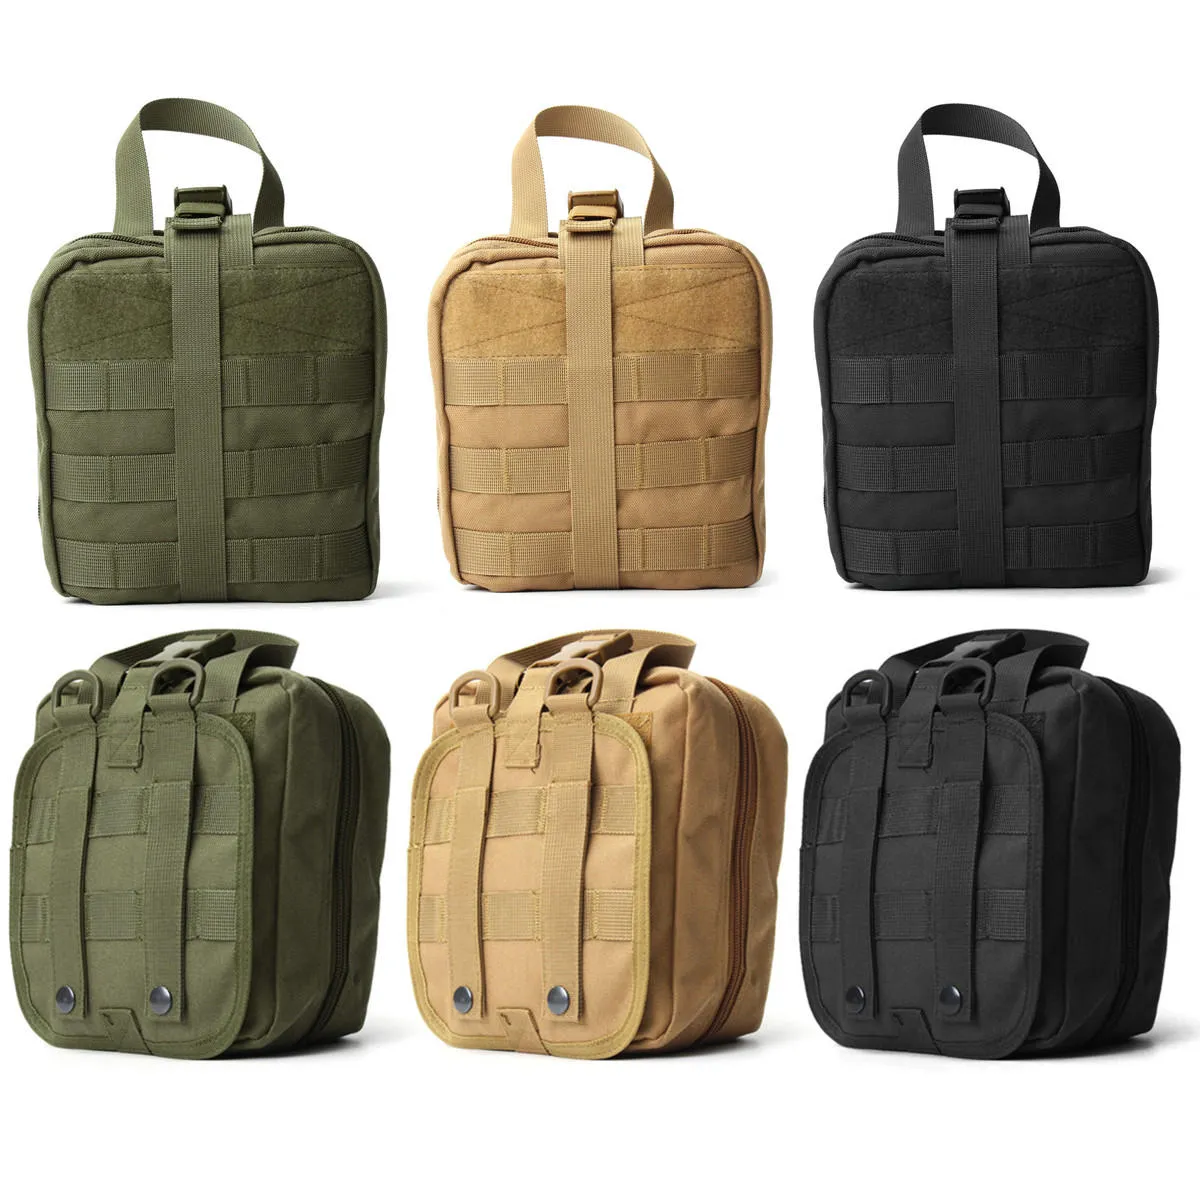 Outdoor Utility Tactical Pouch Medical First Aid Kit Patch Bag Molle Medical Cover Hunting Emergency Survival Package 2 colors